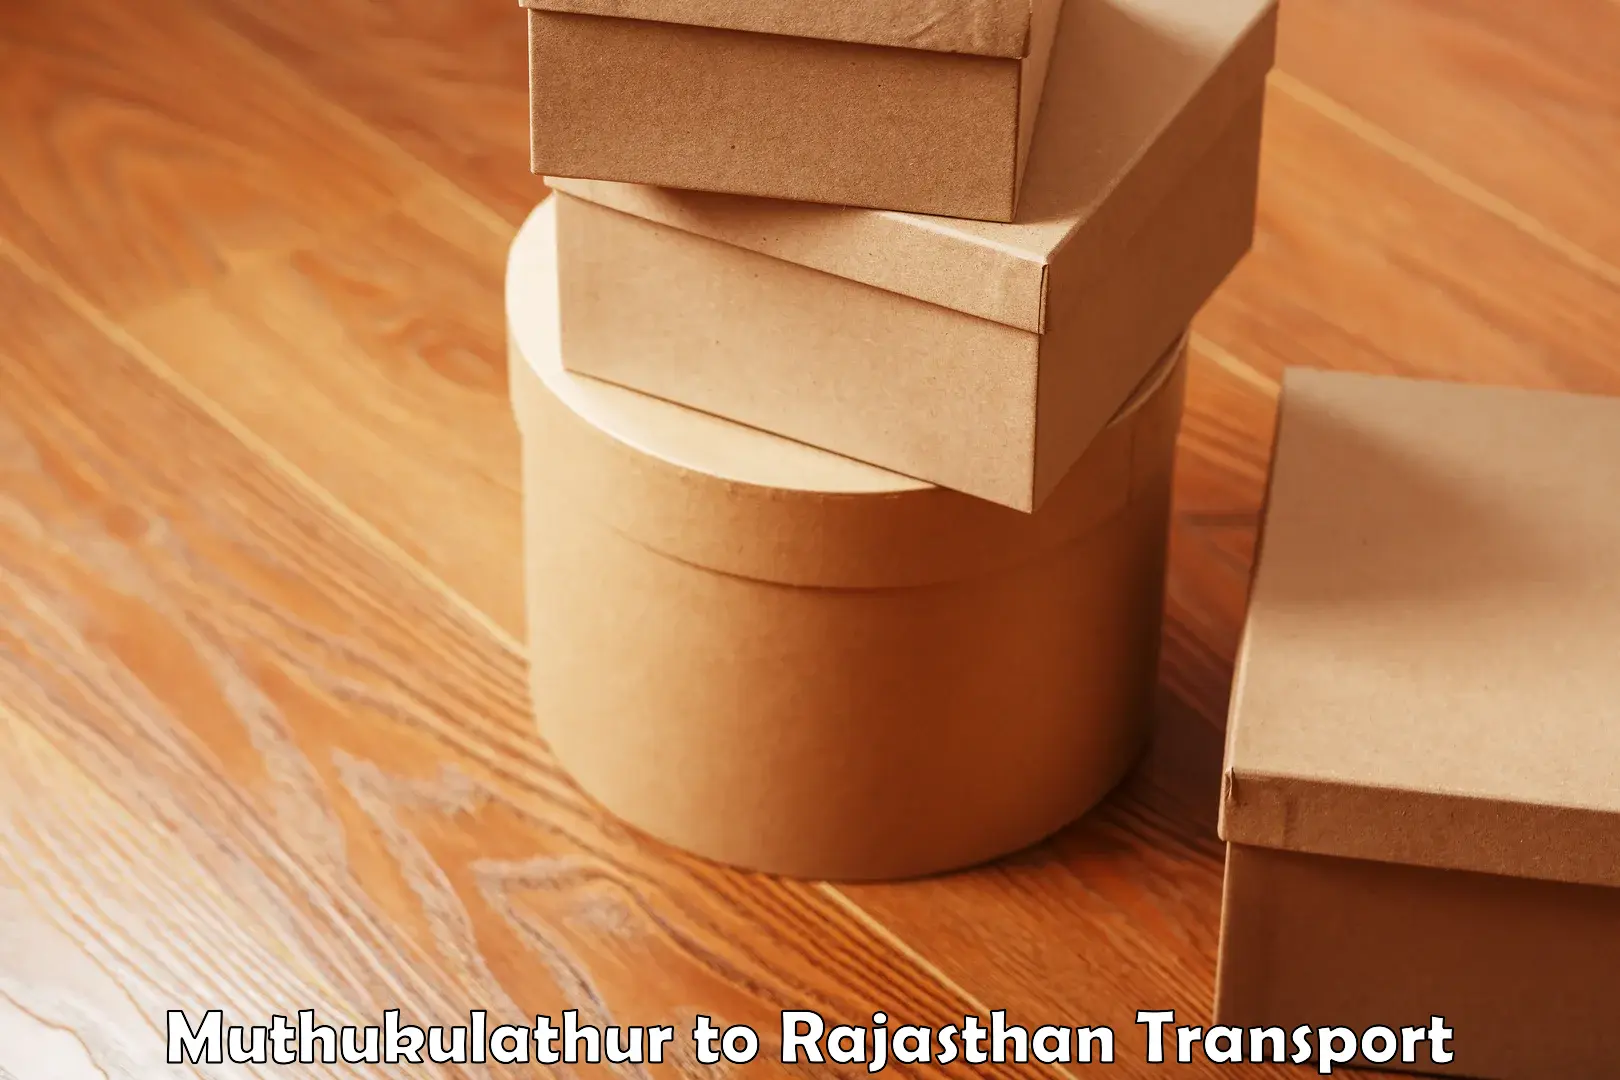 Express transport services Muthukulathur to Rajasthan